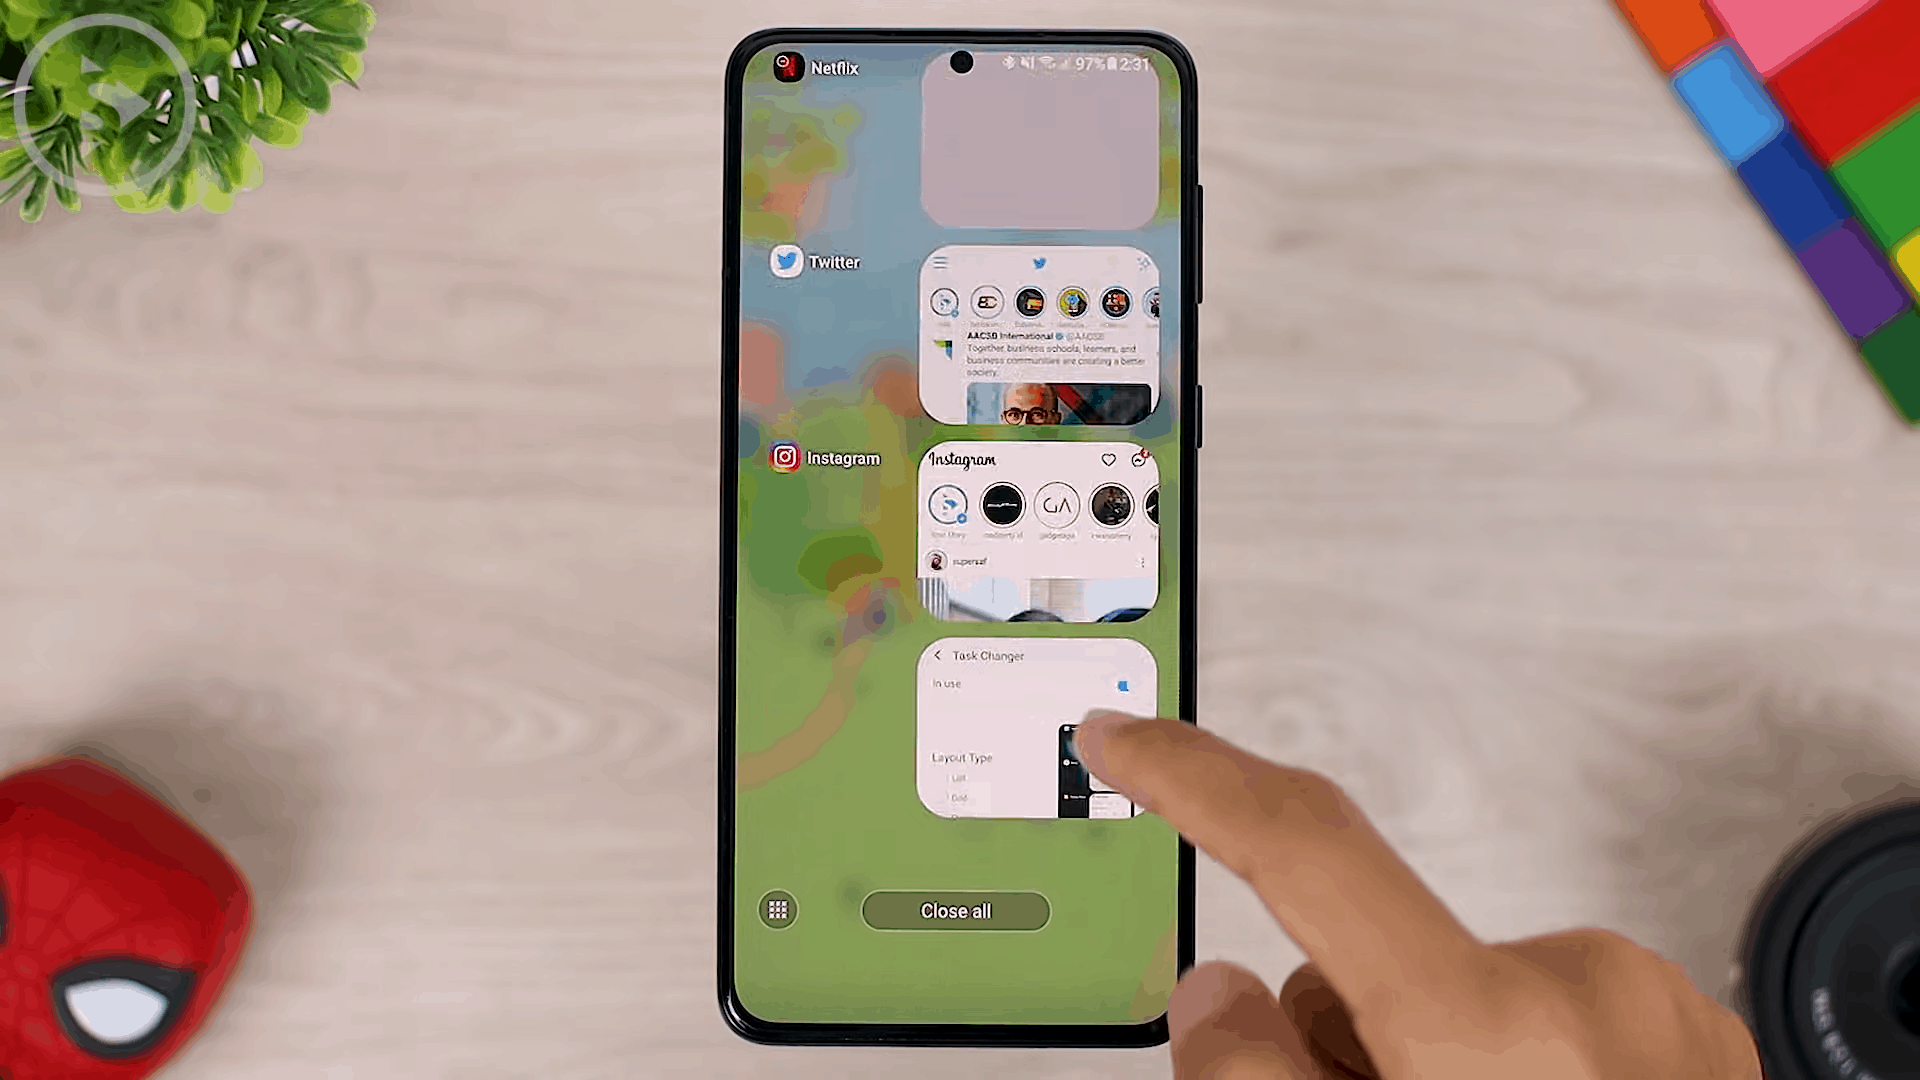 New Task Changer Animation and Layout Types - 8 COOL Features in the LATEST Good Lock Update April 2021